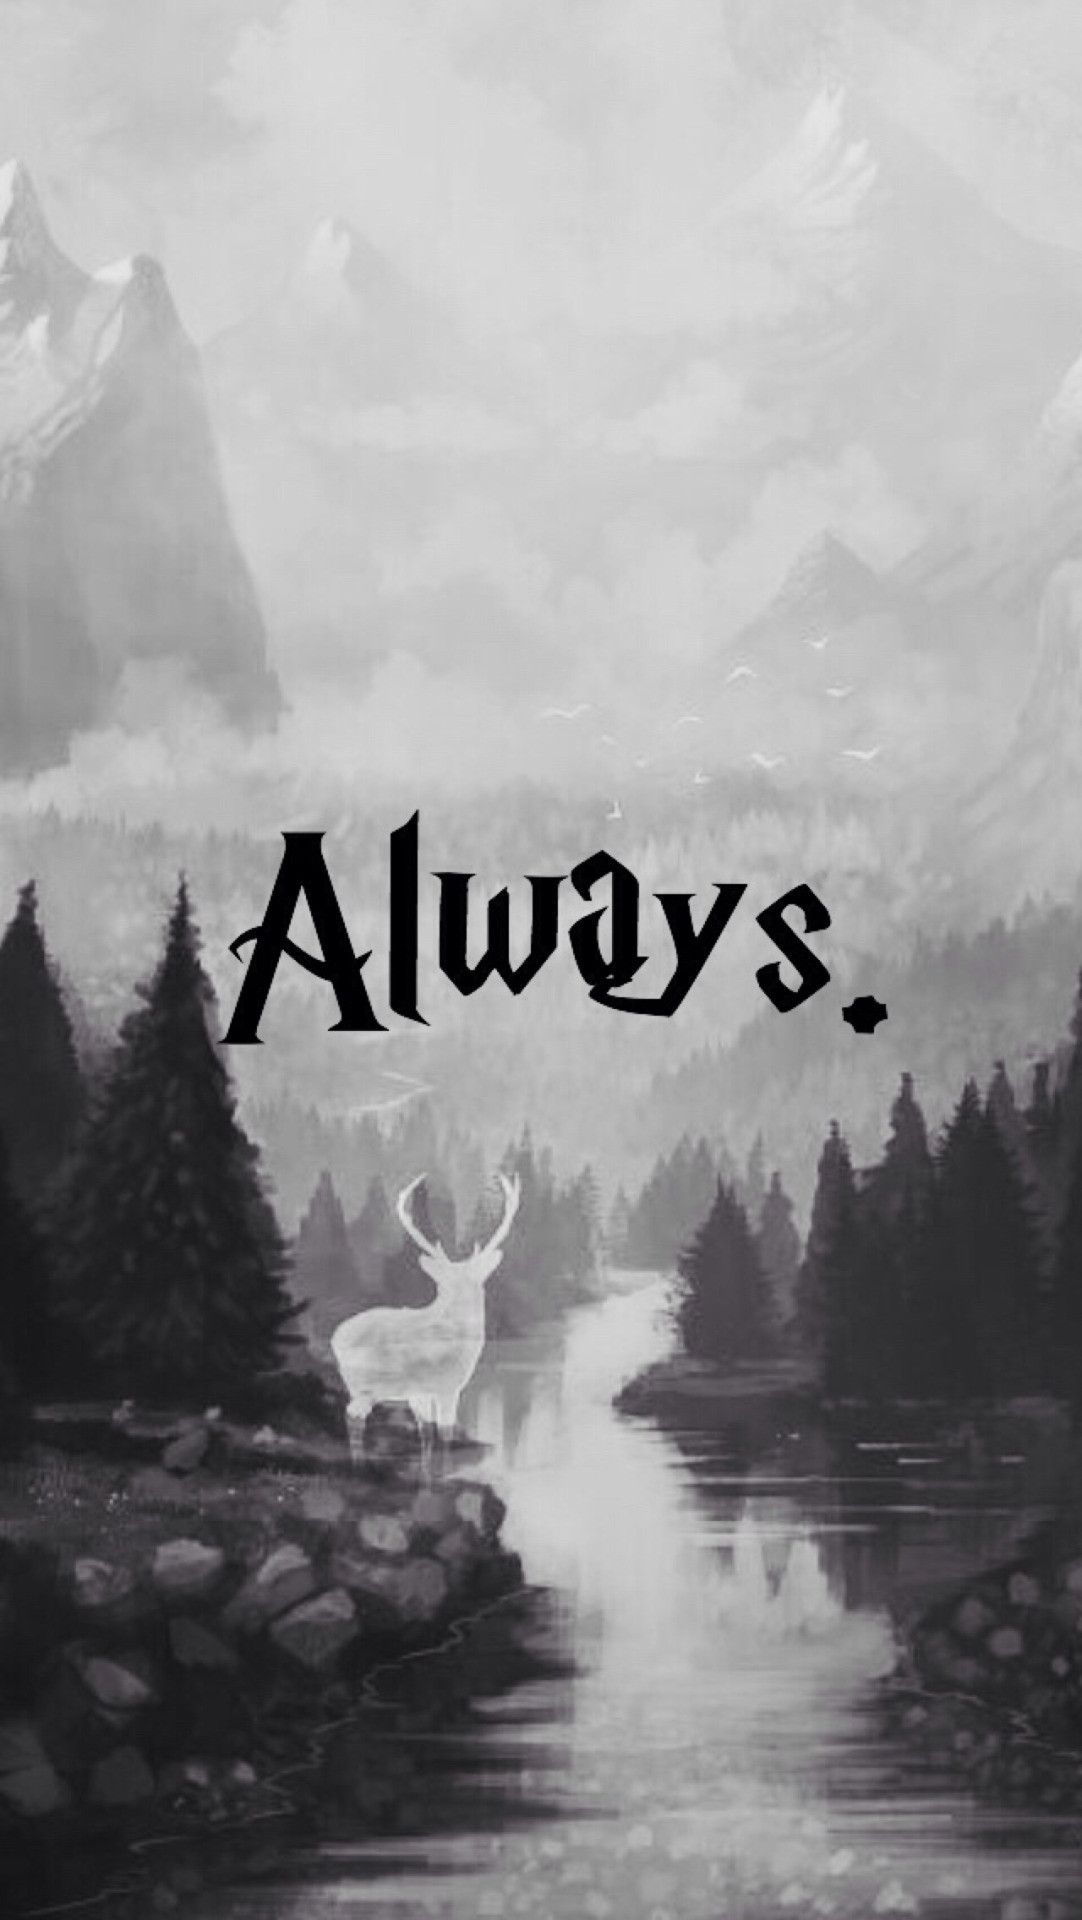 IPhone wallpaper with the words 